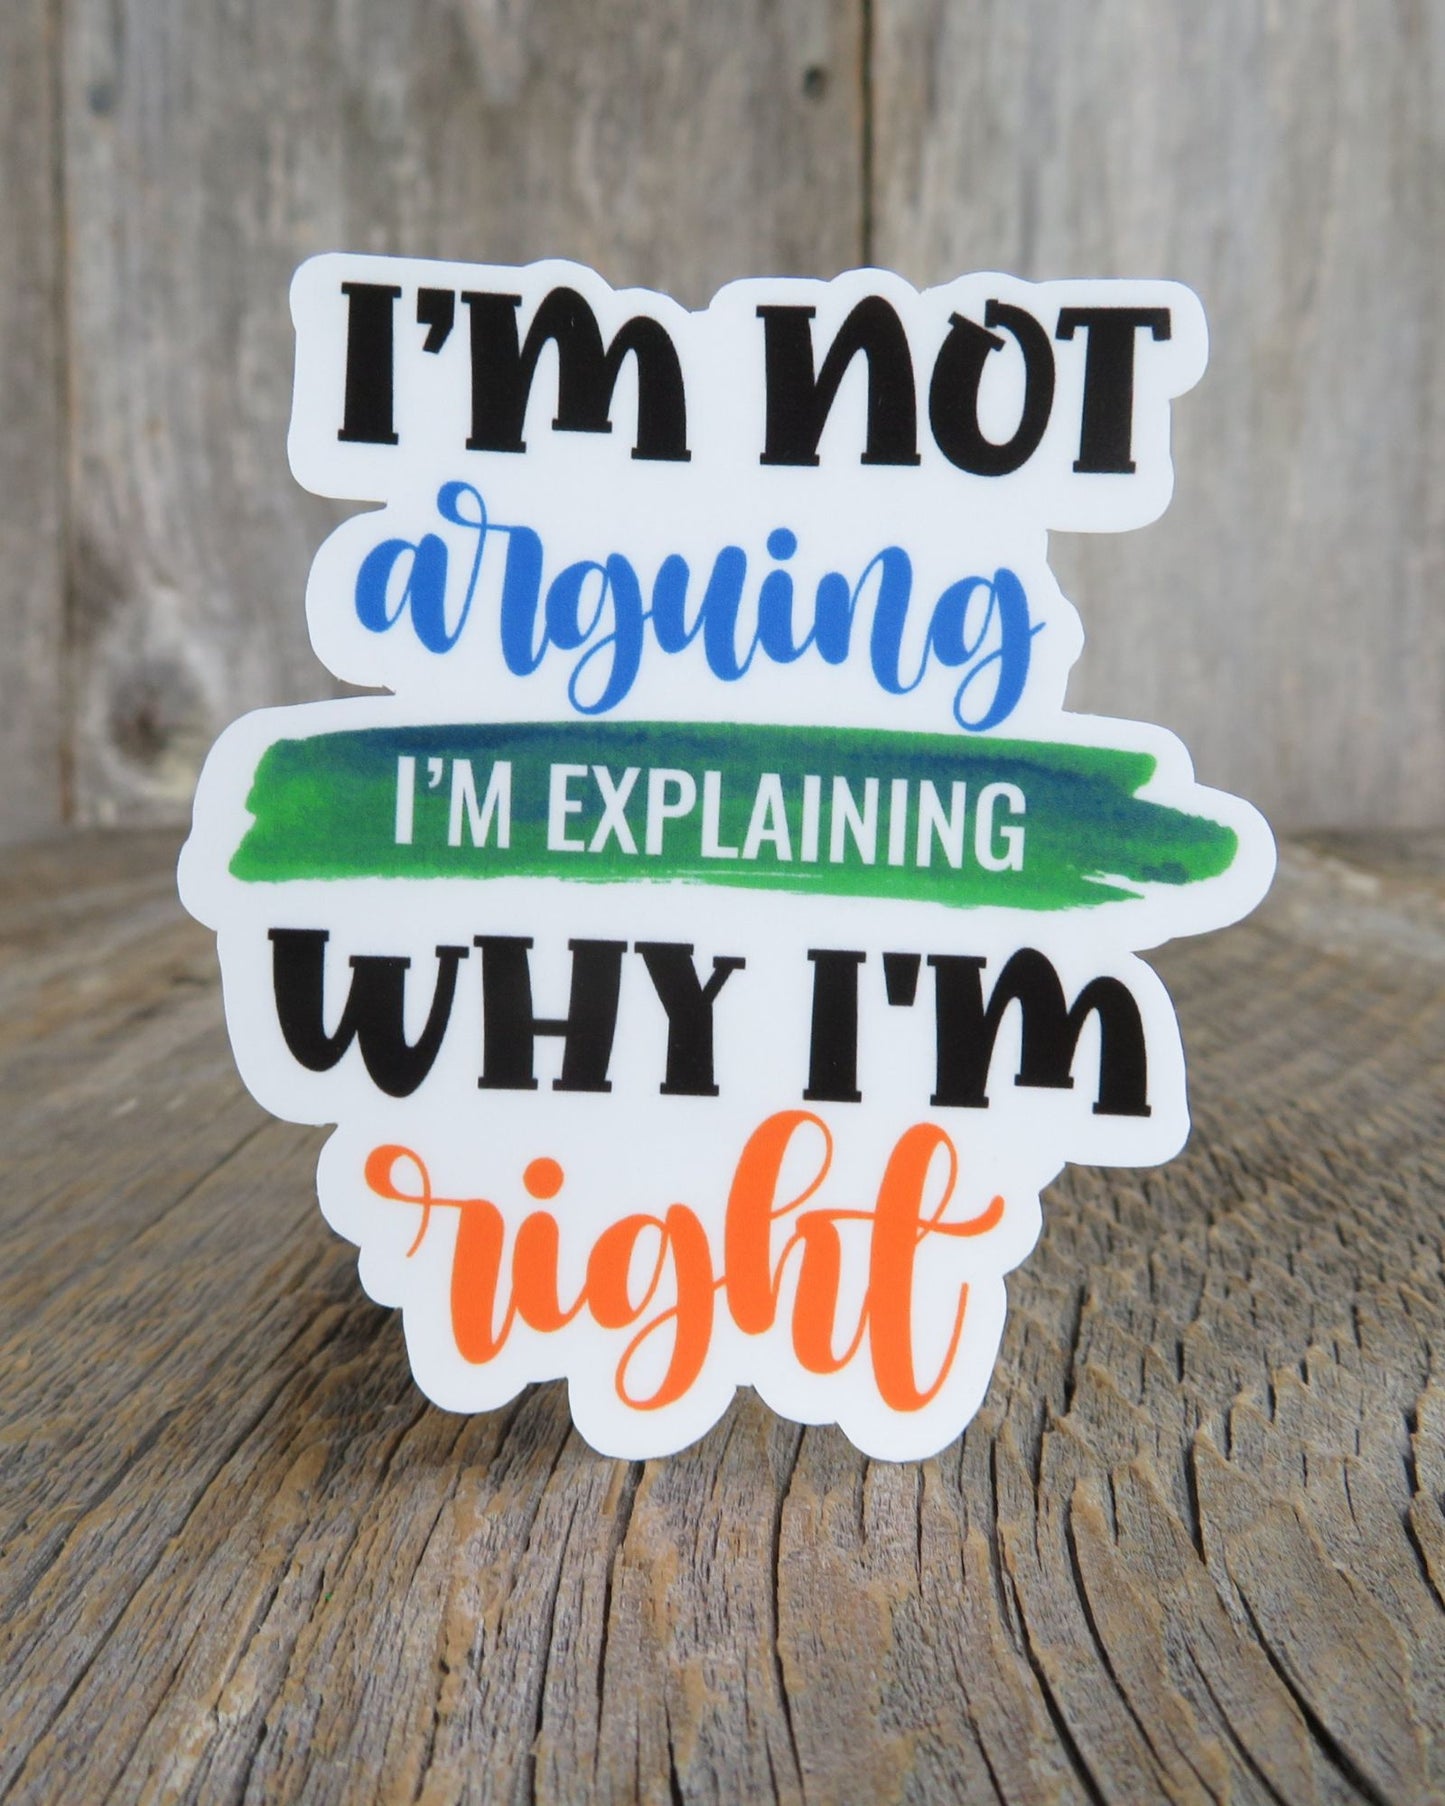 I'm Not Arguing I'm Explaining Why I am Right Sticker Full Color Social Funny Sarcastic Outspoken Phrase Stickers